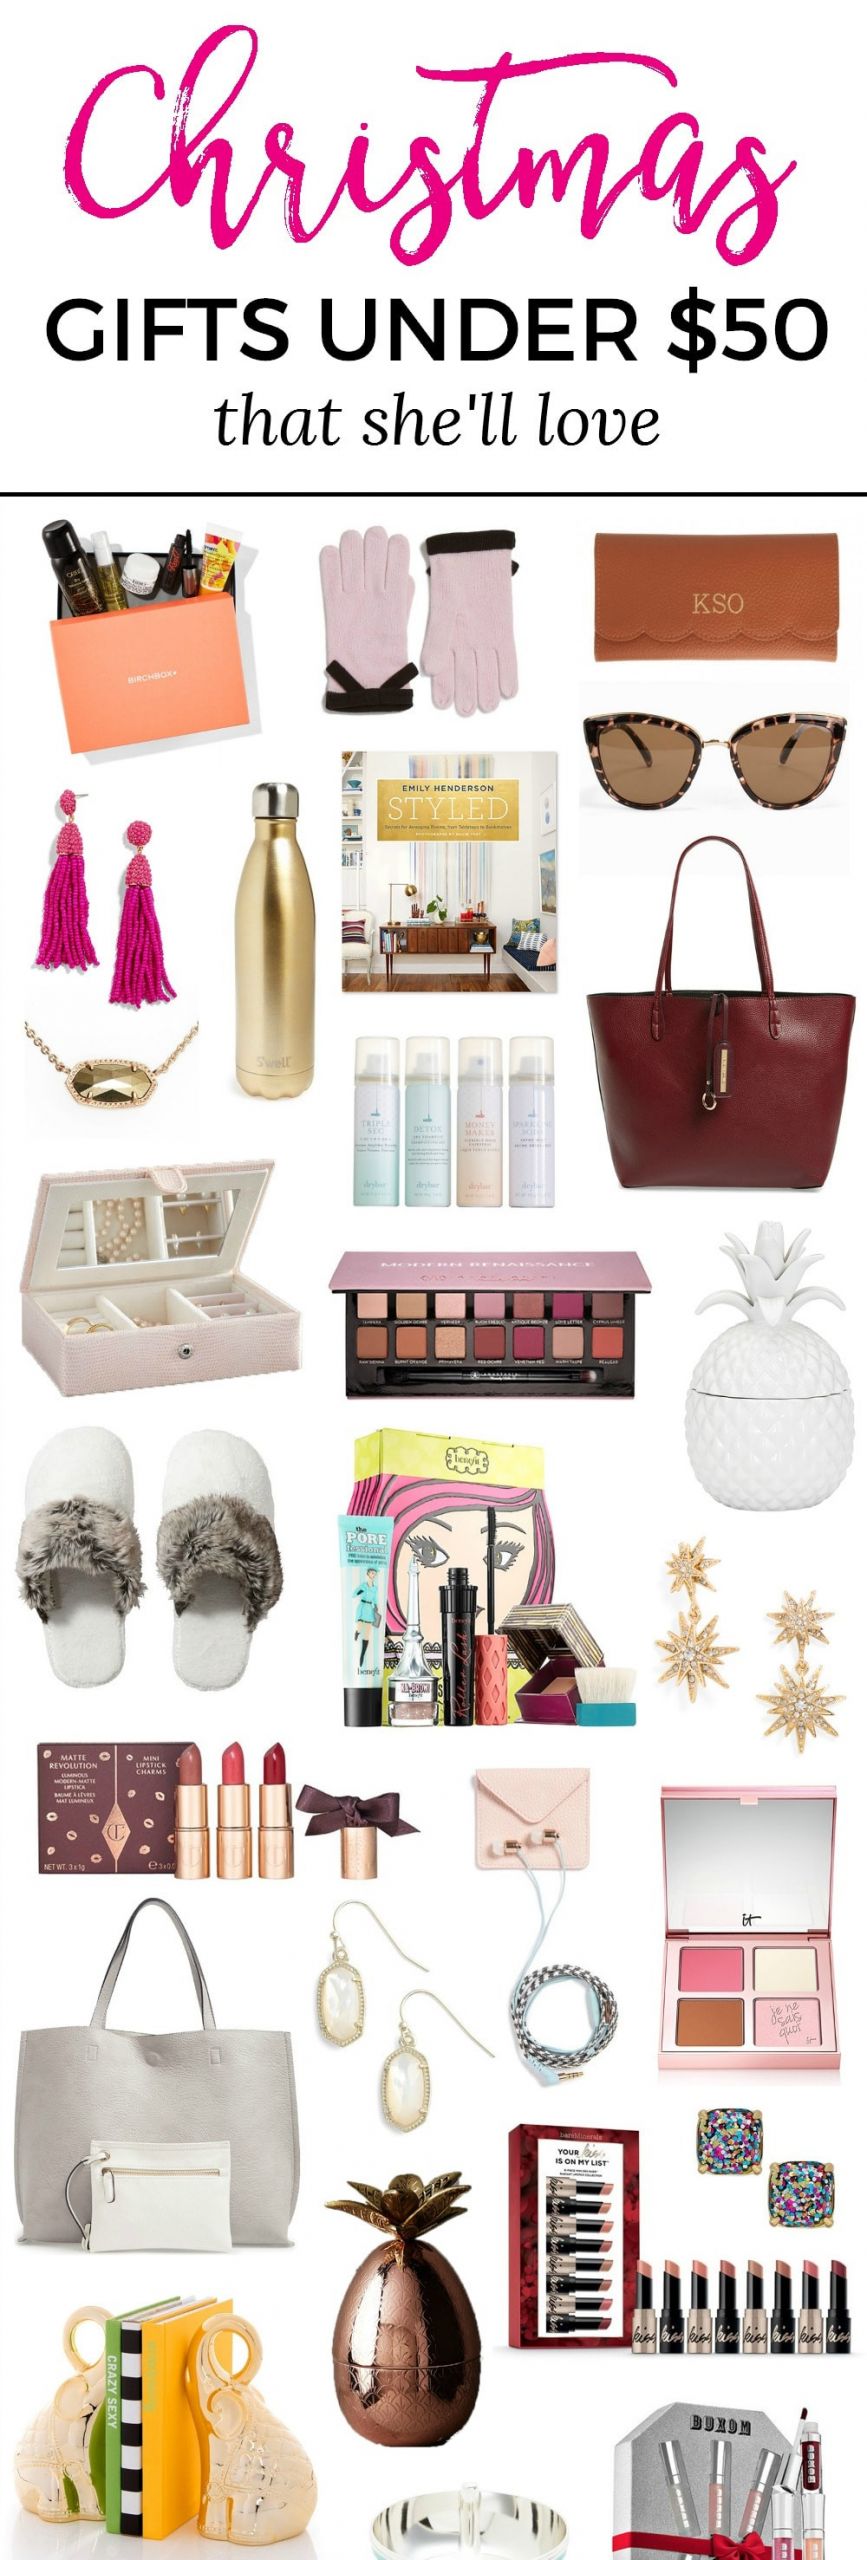 Great Christmas Gifts For Women
 The Best Christmas Gift Ideas for Women under $50